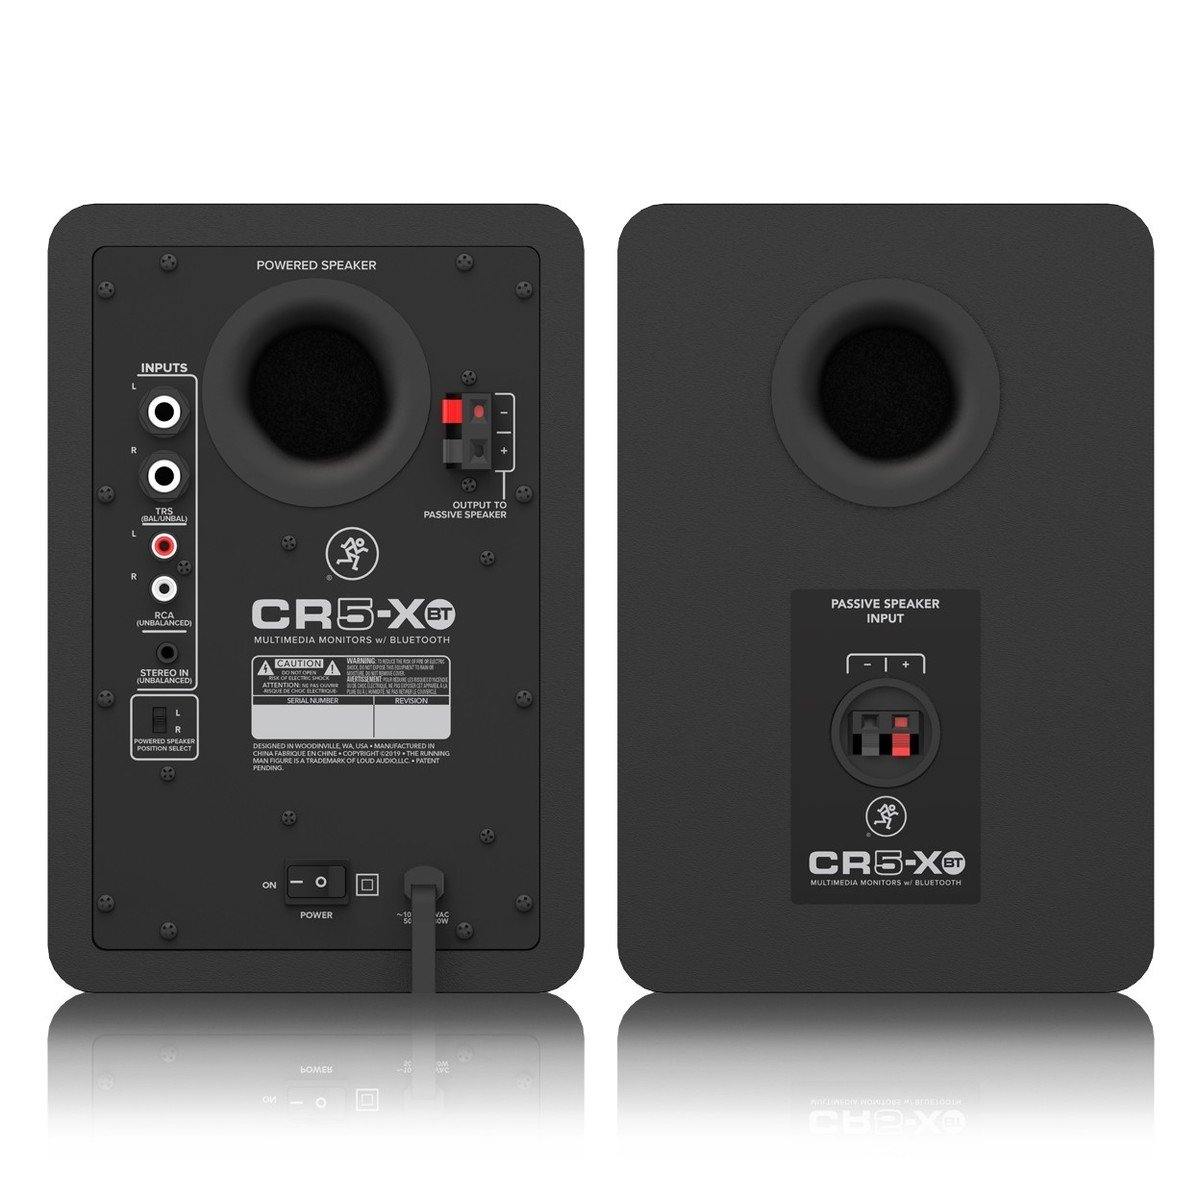 Mackie CR5-XBT 5" Multimedia Monitors with Bluetooth - DY Pro Audio